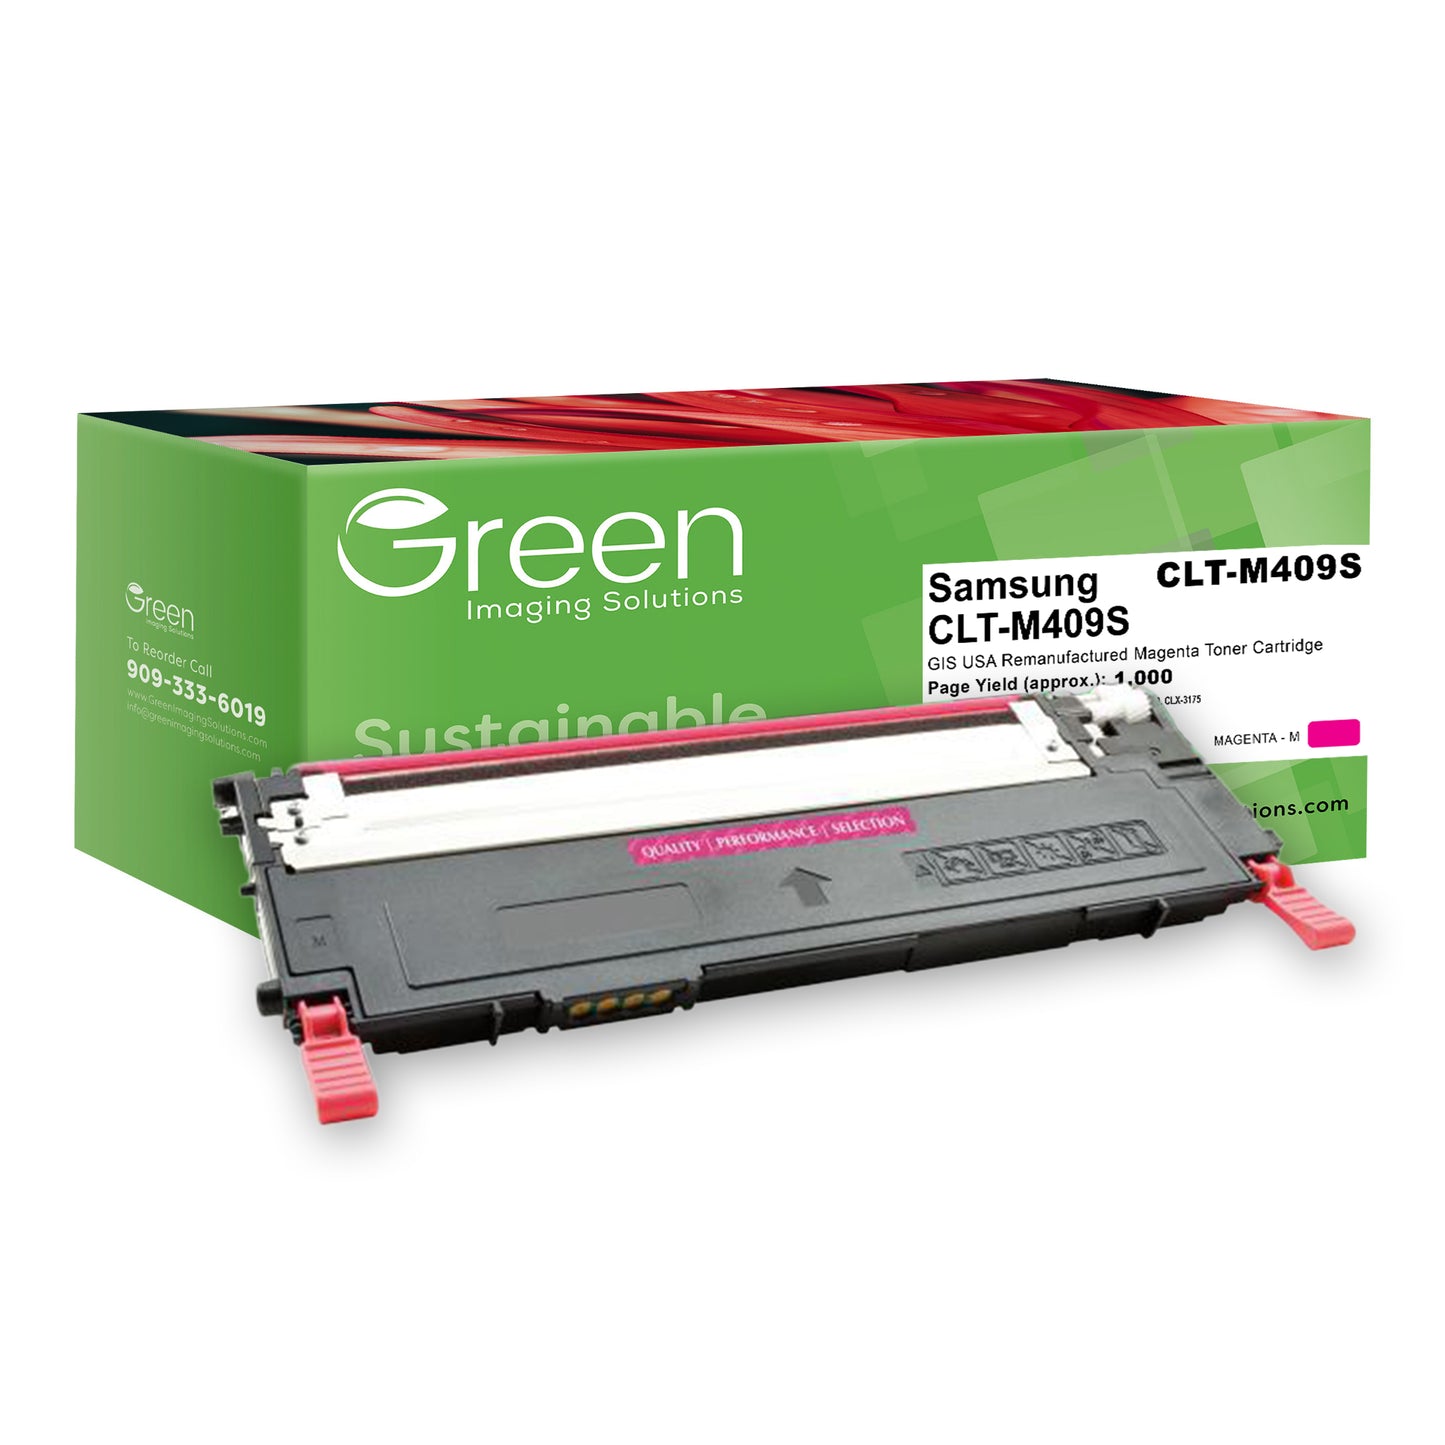 Green Imaging Solutions USA Remanufactured Magenta Toner Cartridge for Samsung CLT-M409S